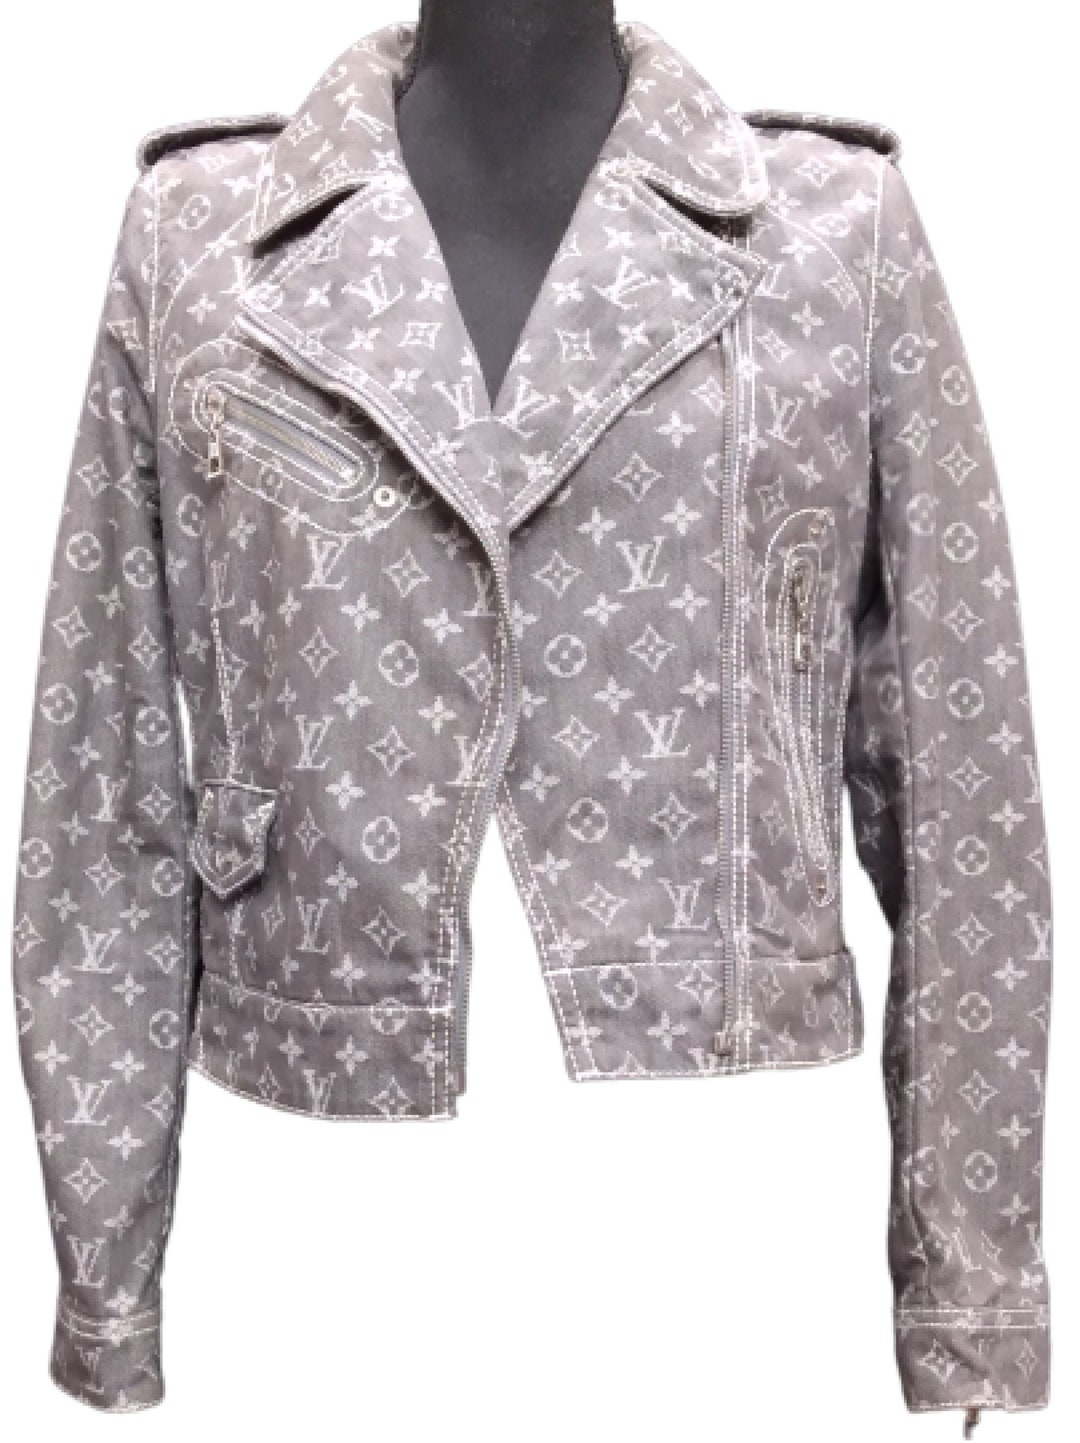 LV Monogram Trenchcoat – Couture Collection Closet